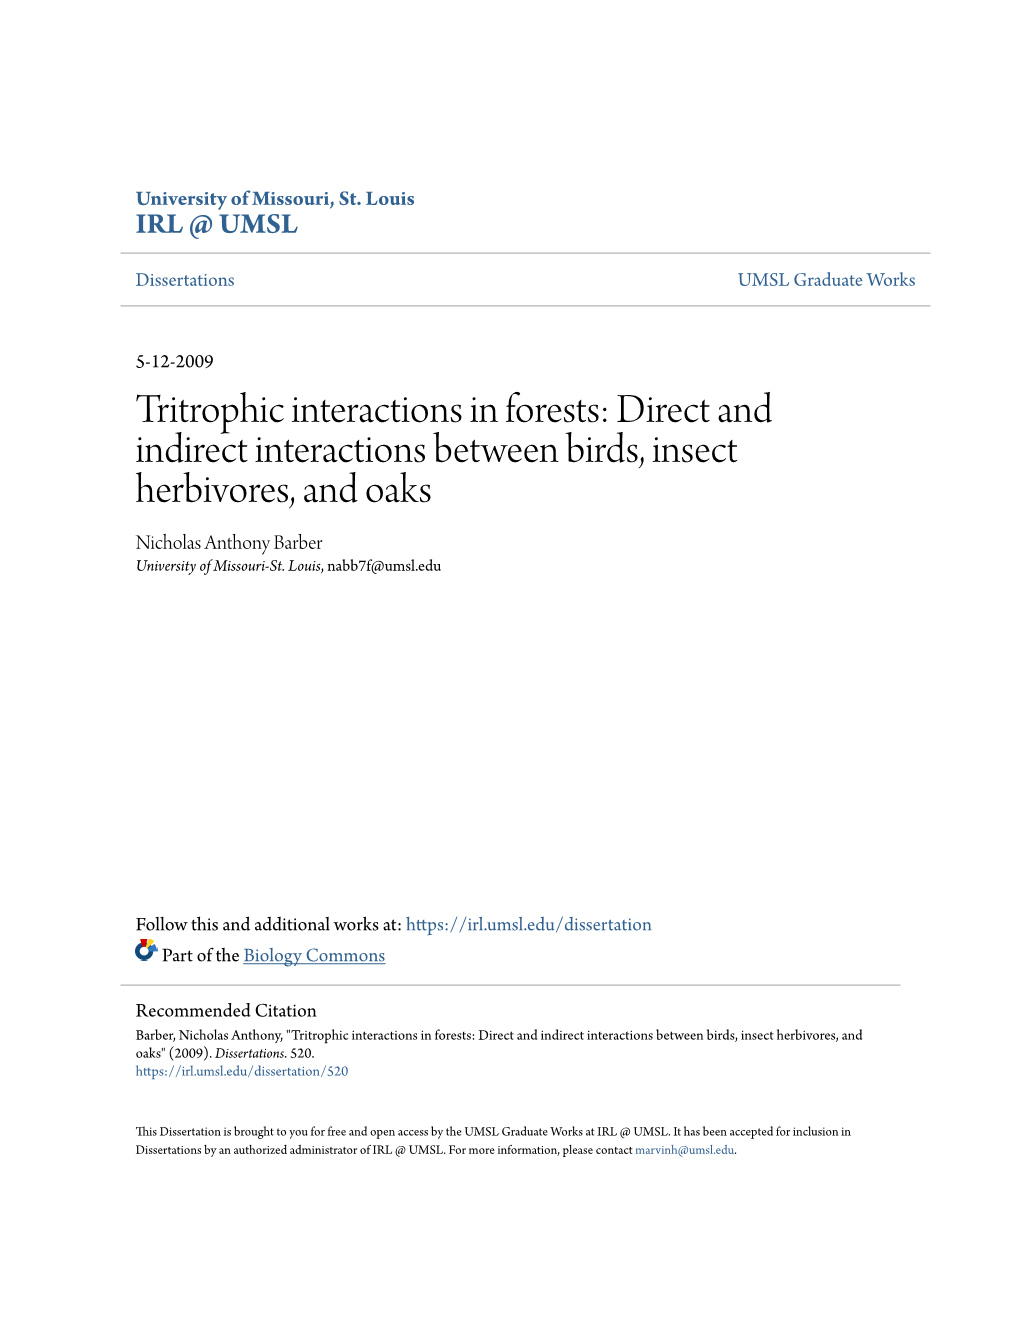 Direct and Indirect Interactions Between Birds, Insect Herbivores, and Oaks Nicholas Anthony Barber University of Missouri-St